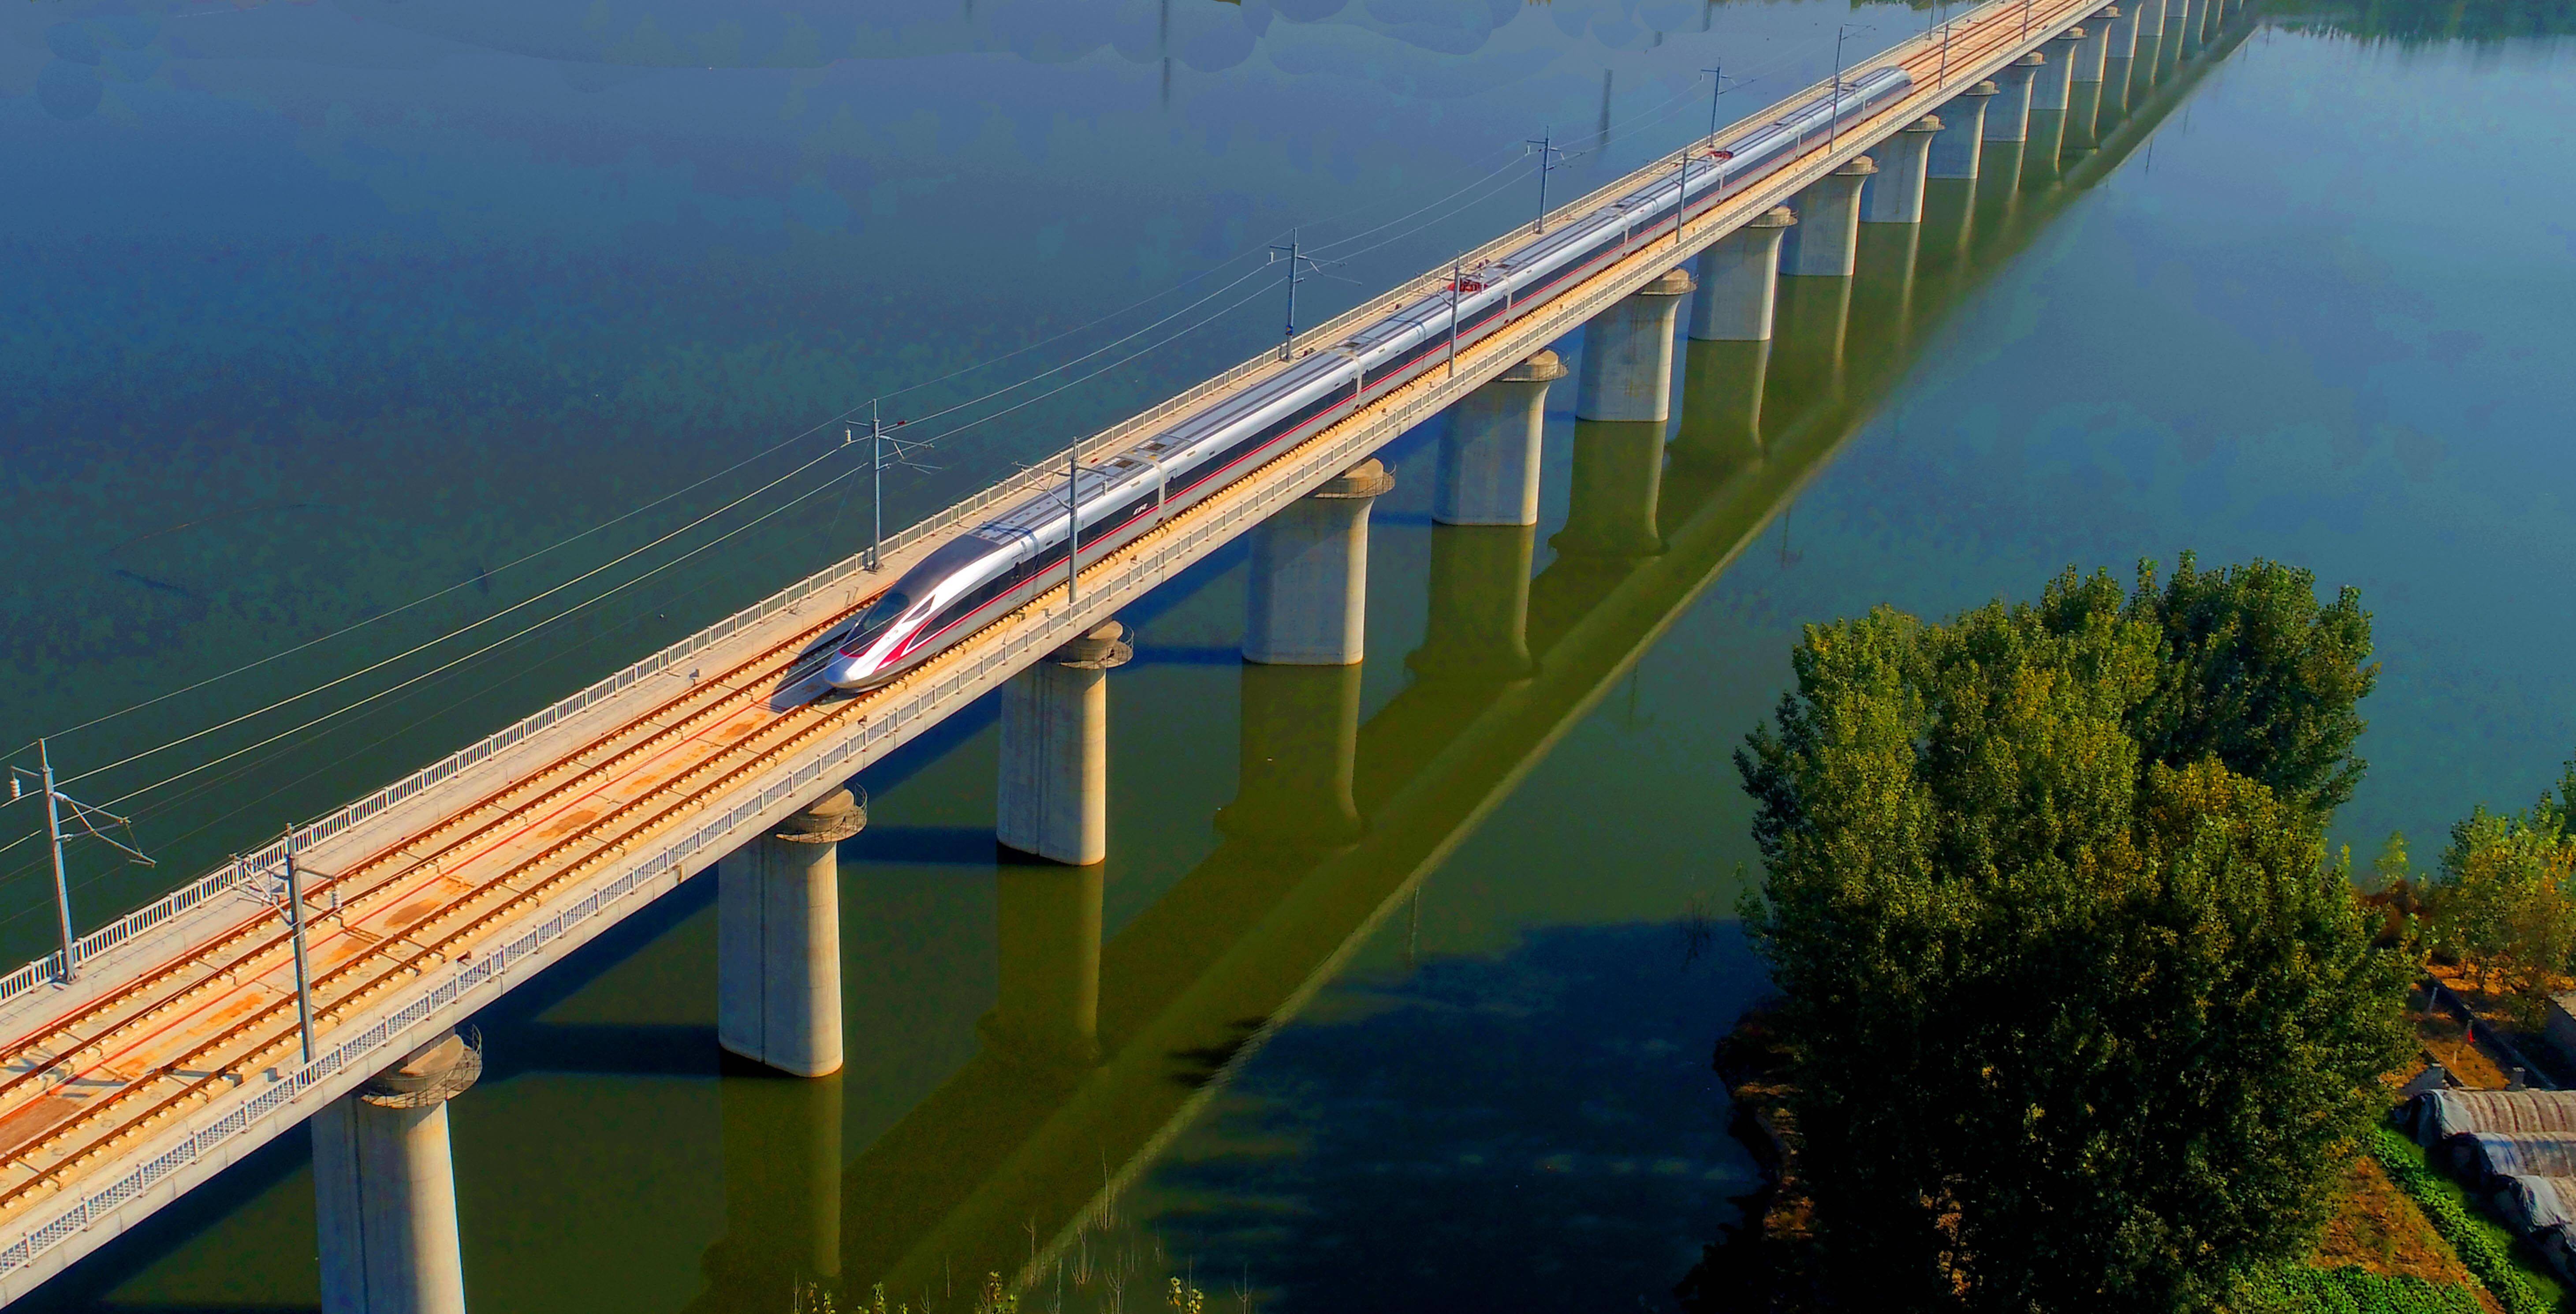  State Railway Jinan Bureau implemented the new map from Jinan to Kunming on January 10 to realize the direct high-speed railway connection